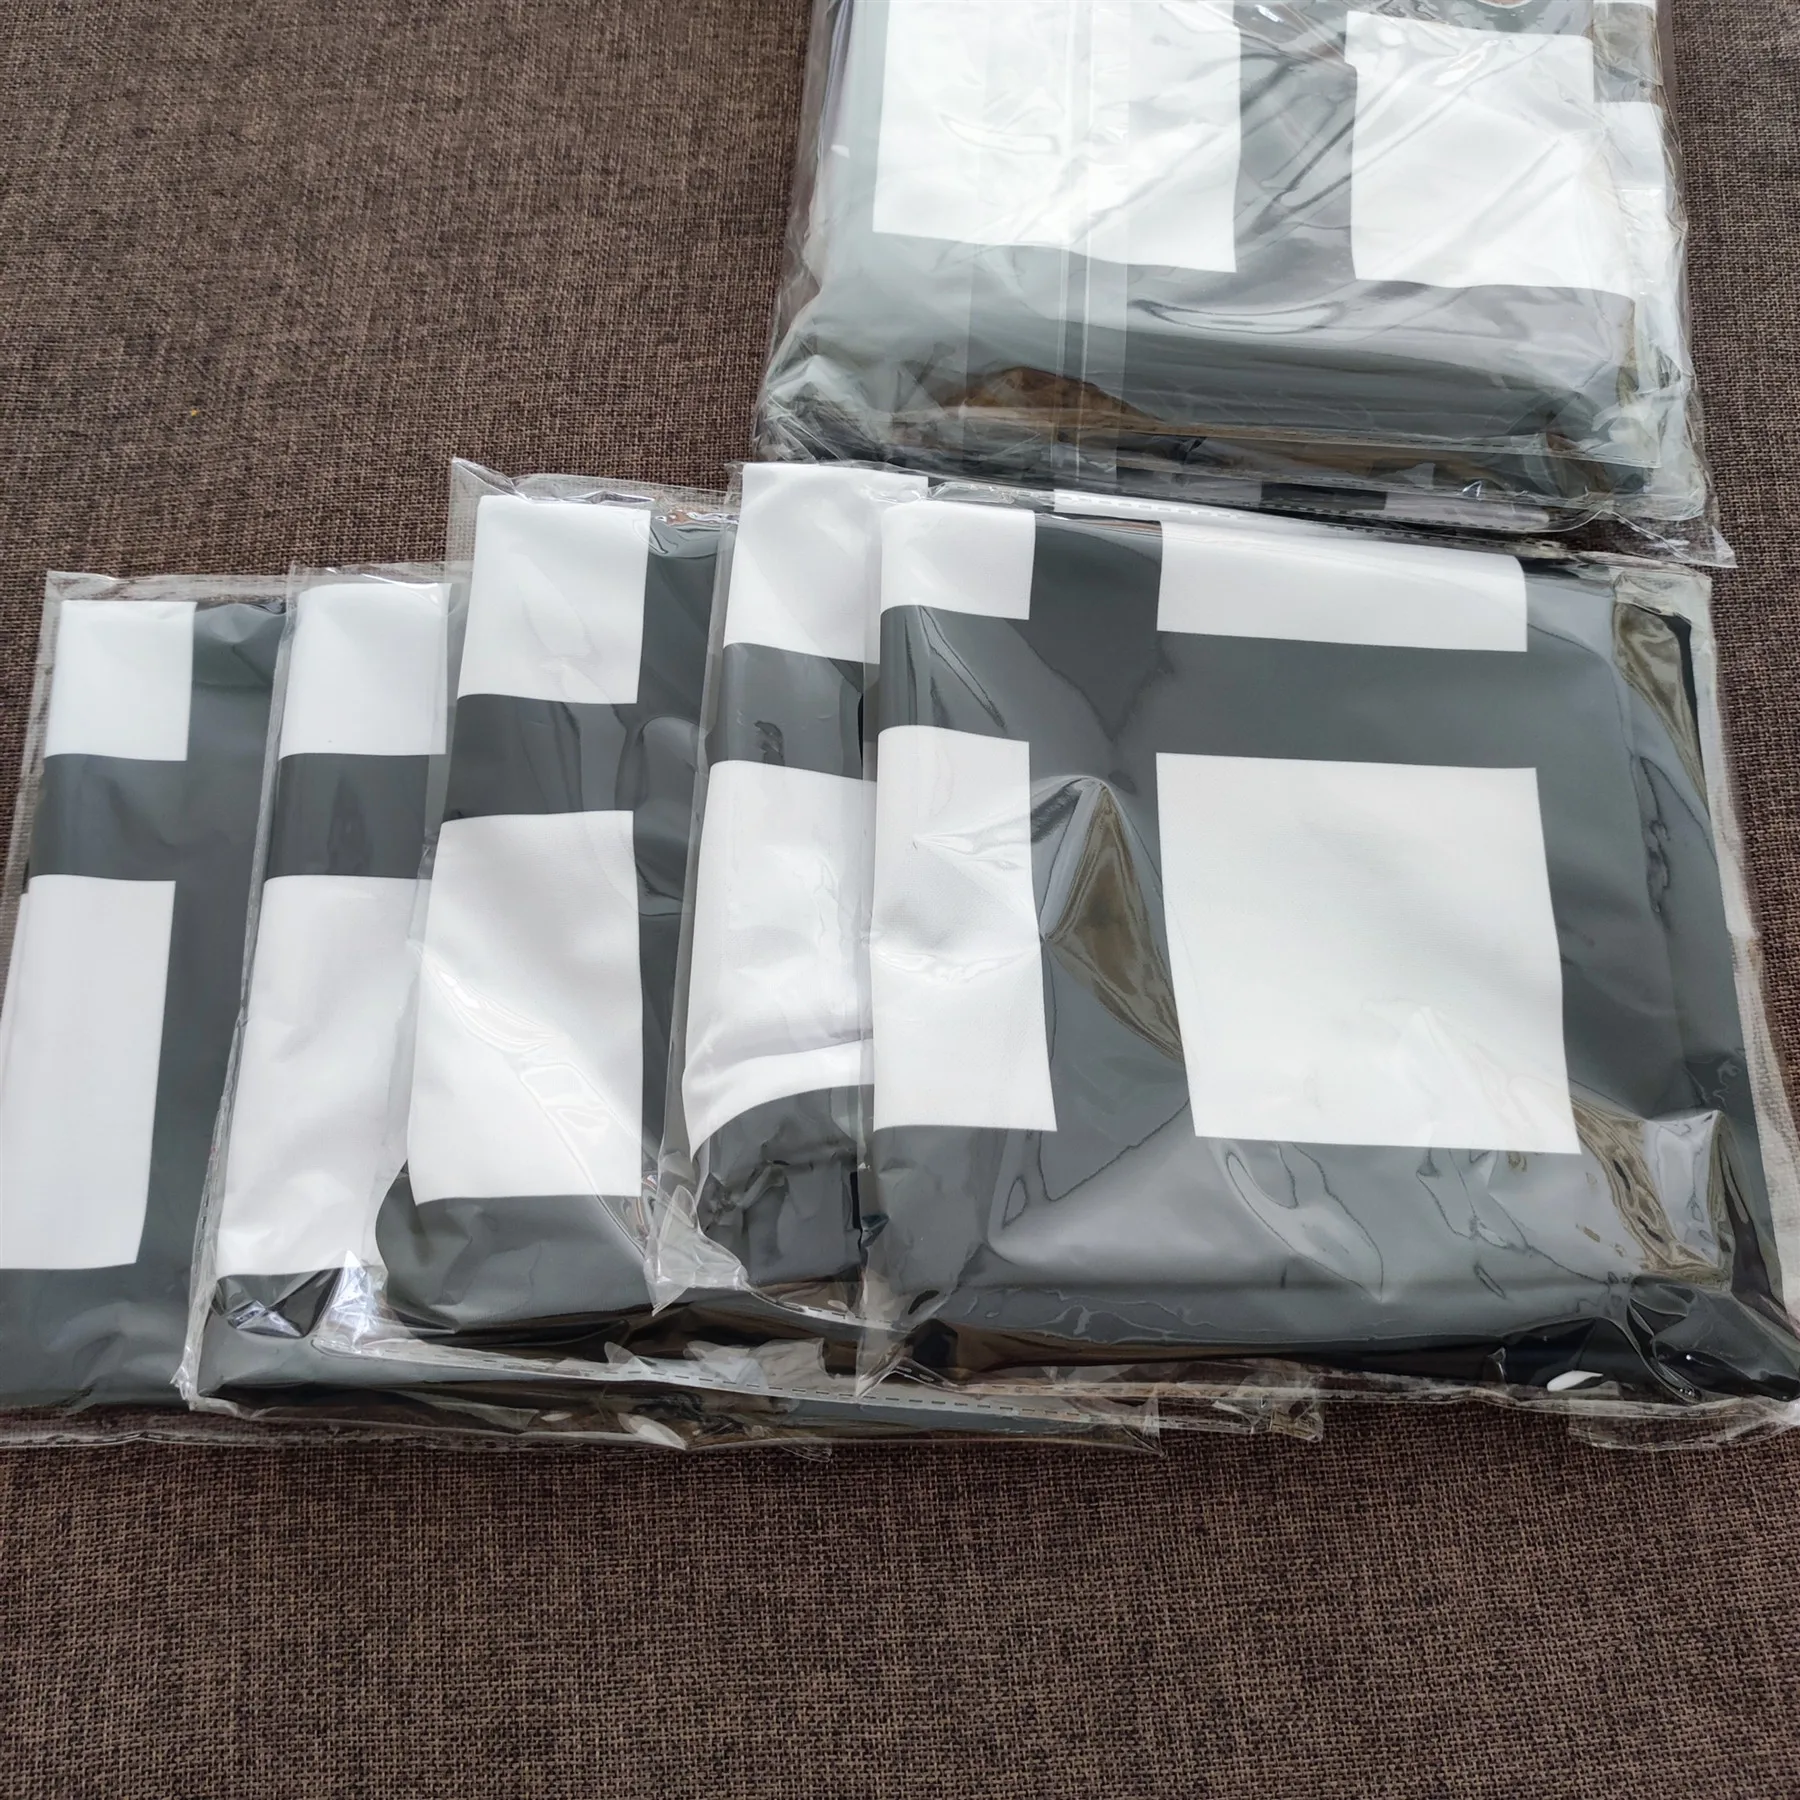 10pcs/Lot Sublimation Blanks Ppillowcase 40x40cm Blank Short Fleece 9 grid 6/4/13 grids Pillow Cover Thermal Transfer Heat Press 10pcs lot sublimation blanks ppillowcase 40x40cm blank short fleece 9 grid 6 4 13 grids pillow cover thermal transfer heat press